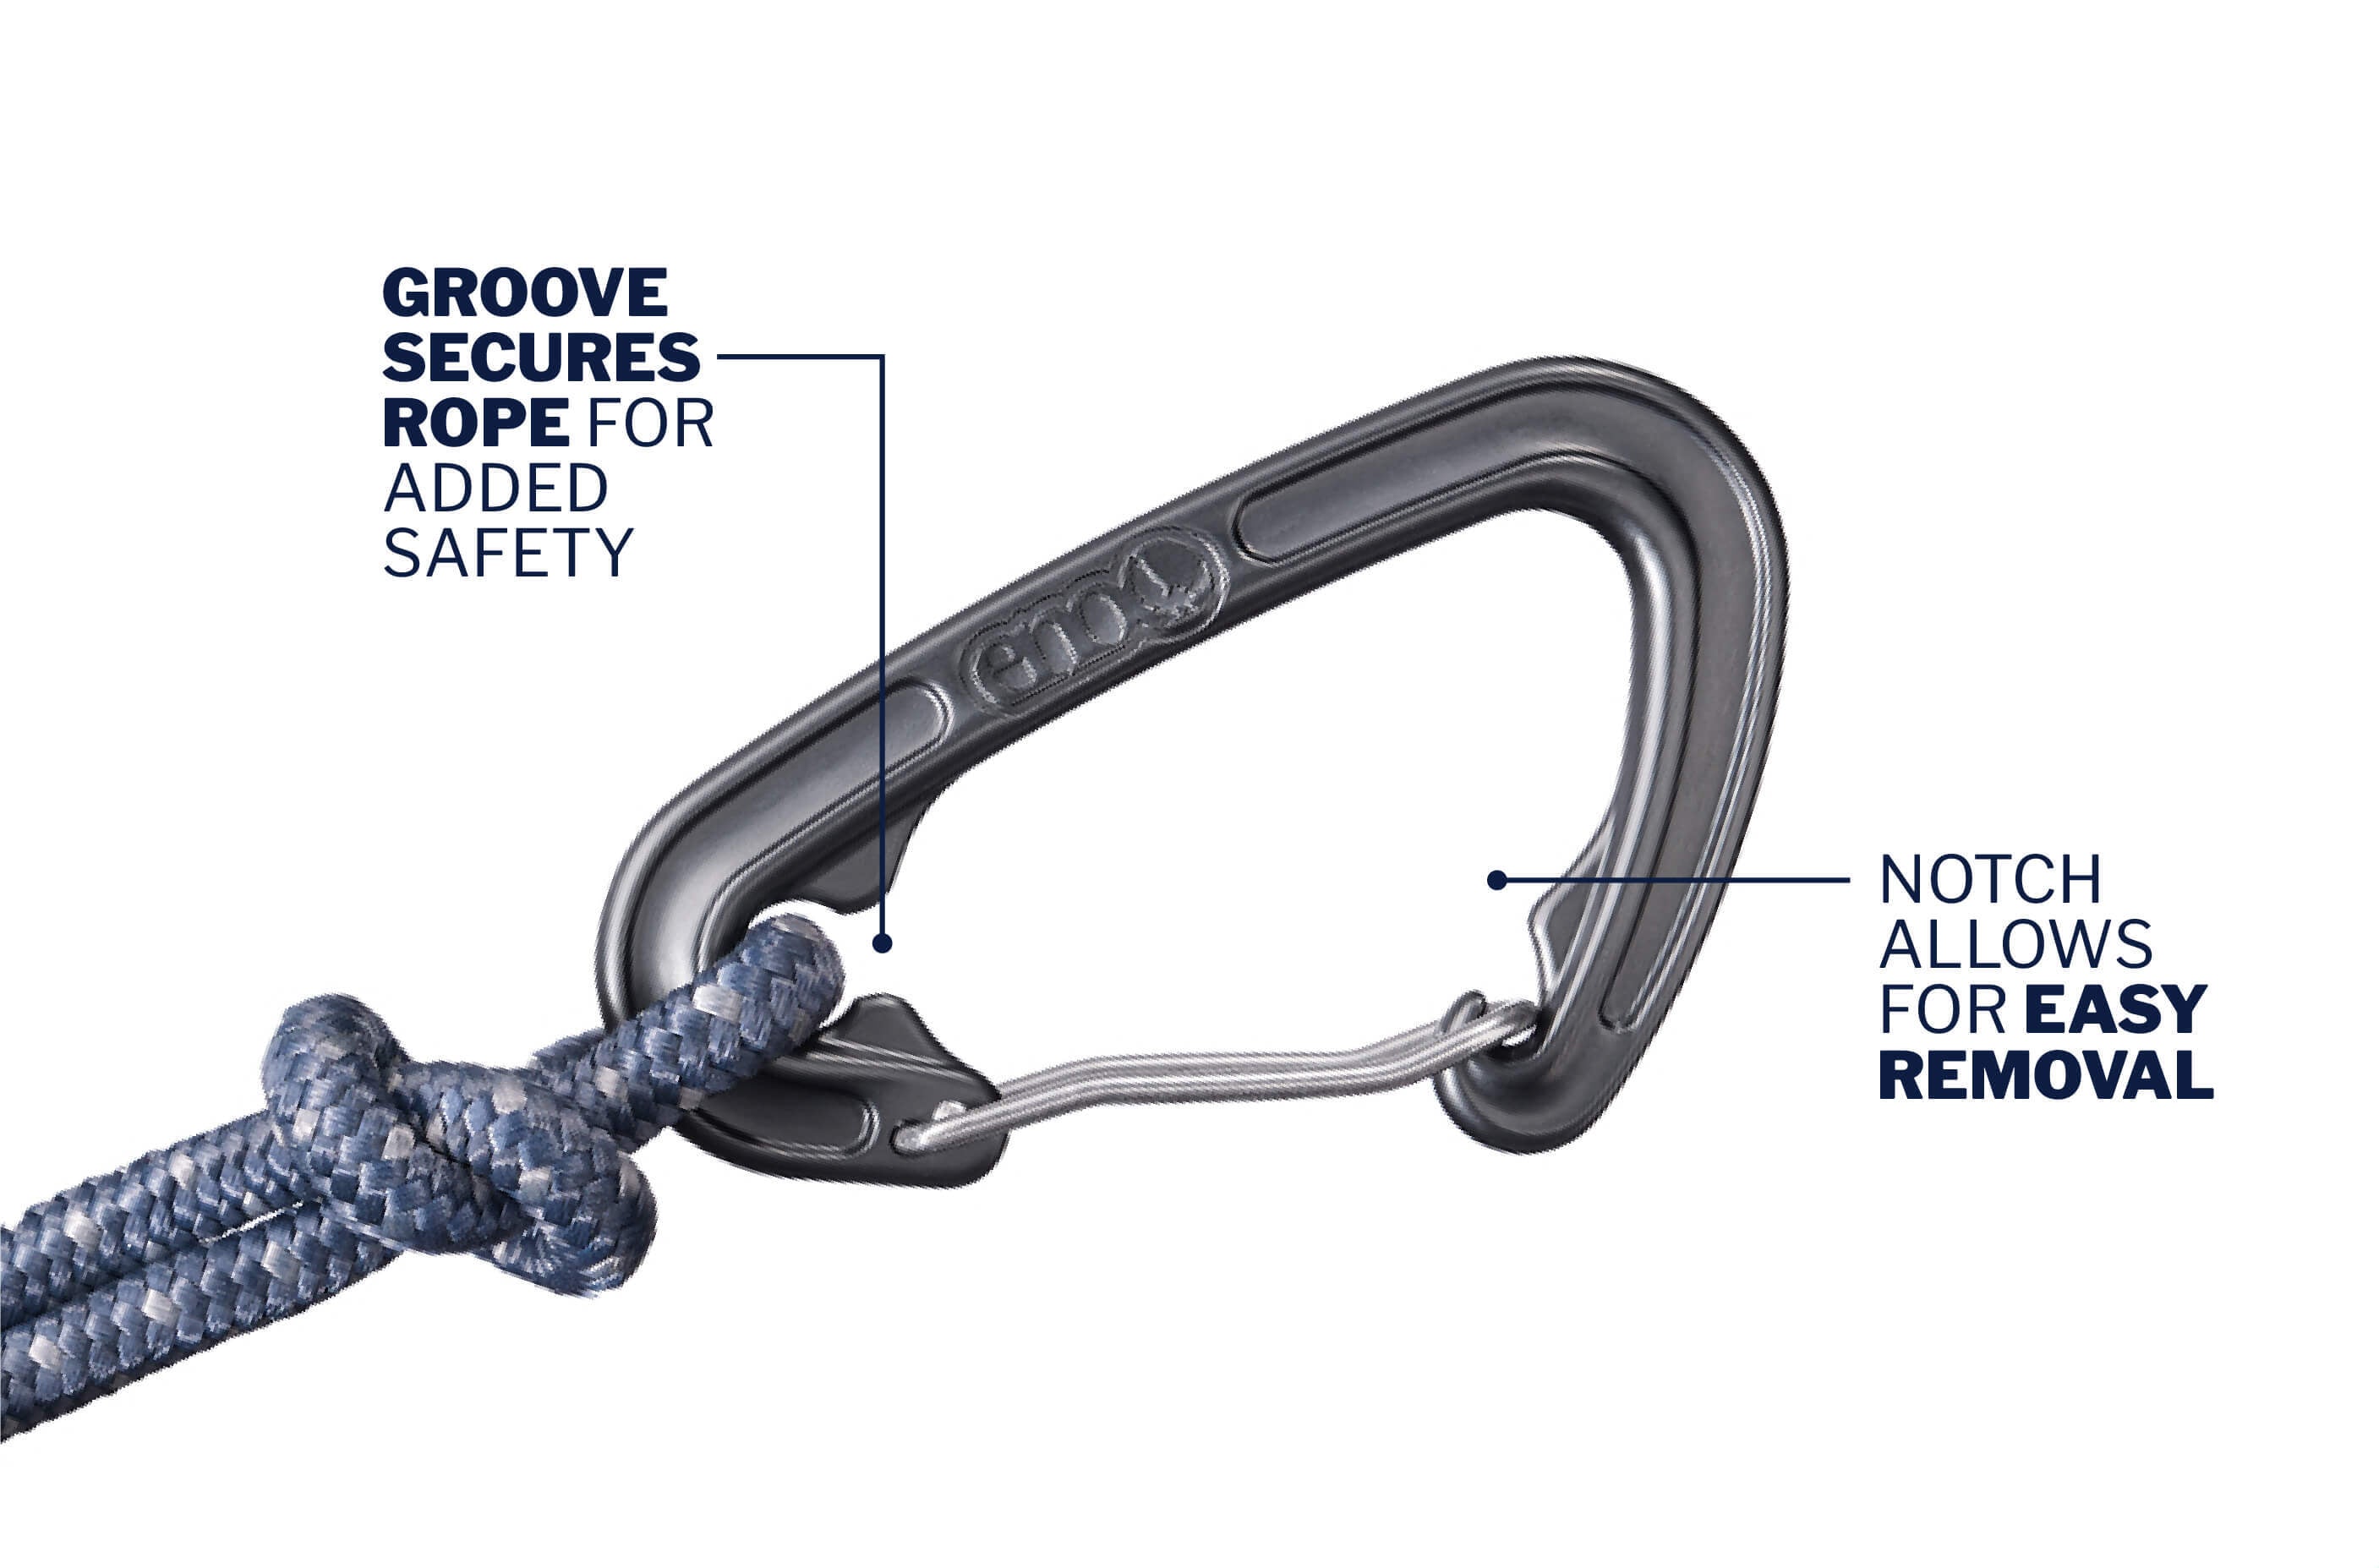 hammock carabiner with text callouts that point out the notch and groove design